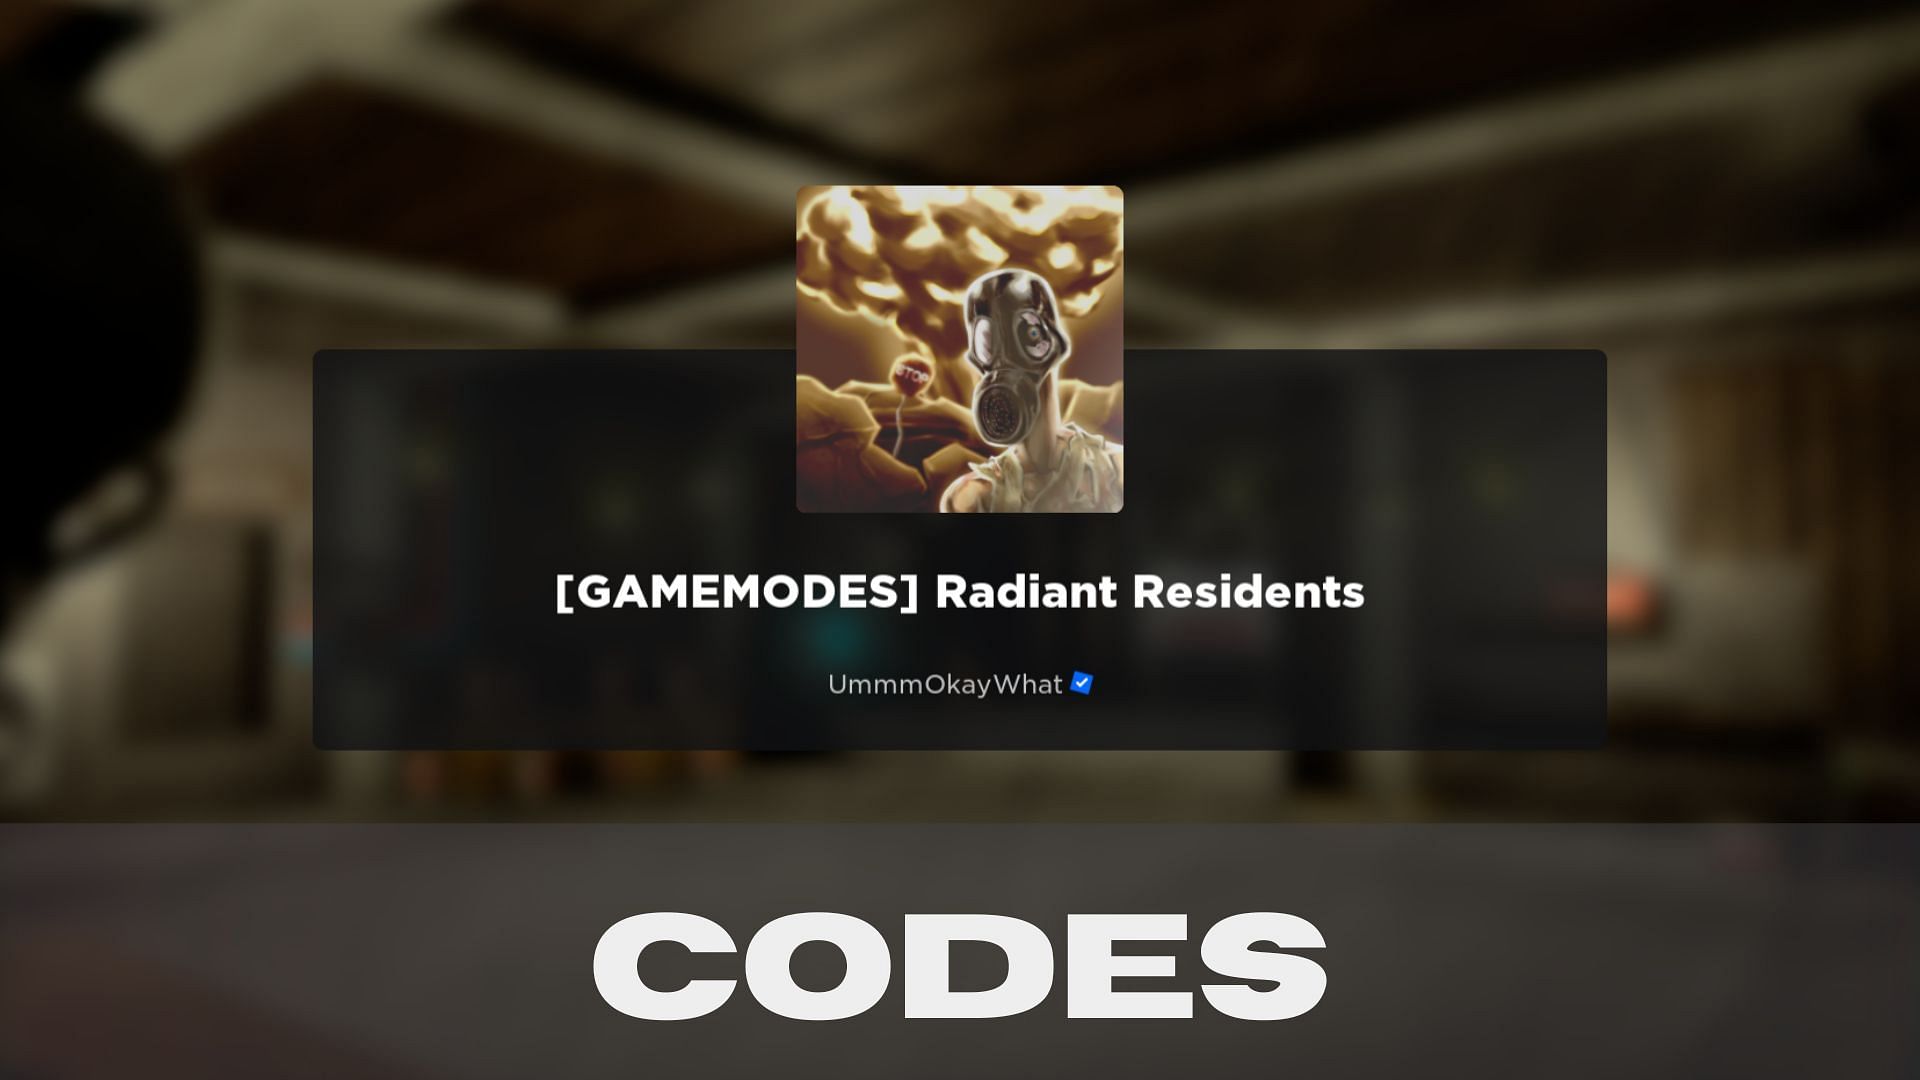 Here are the latest Radiant Residents codes